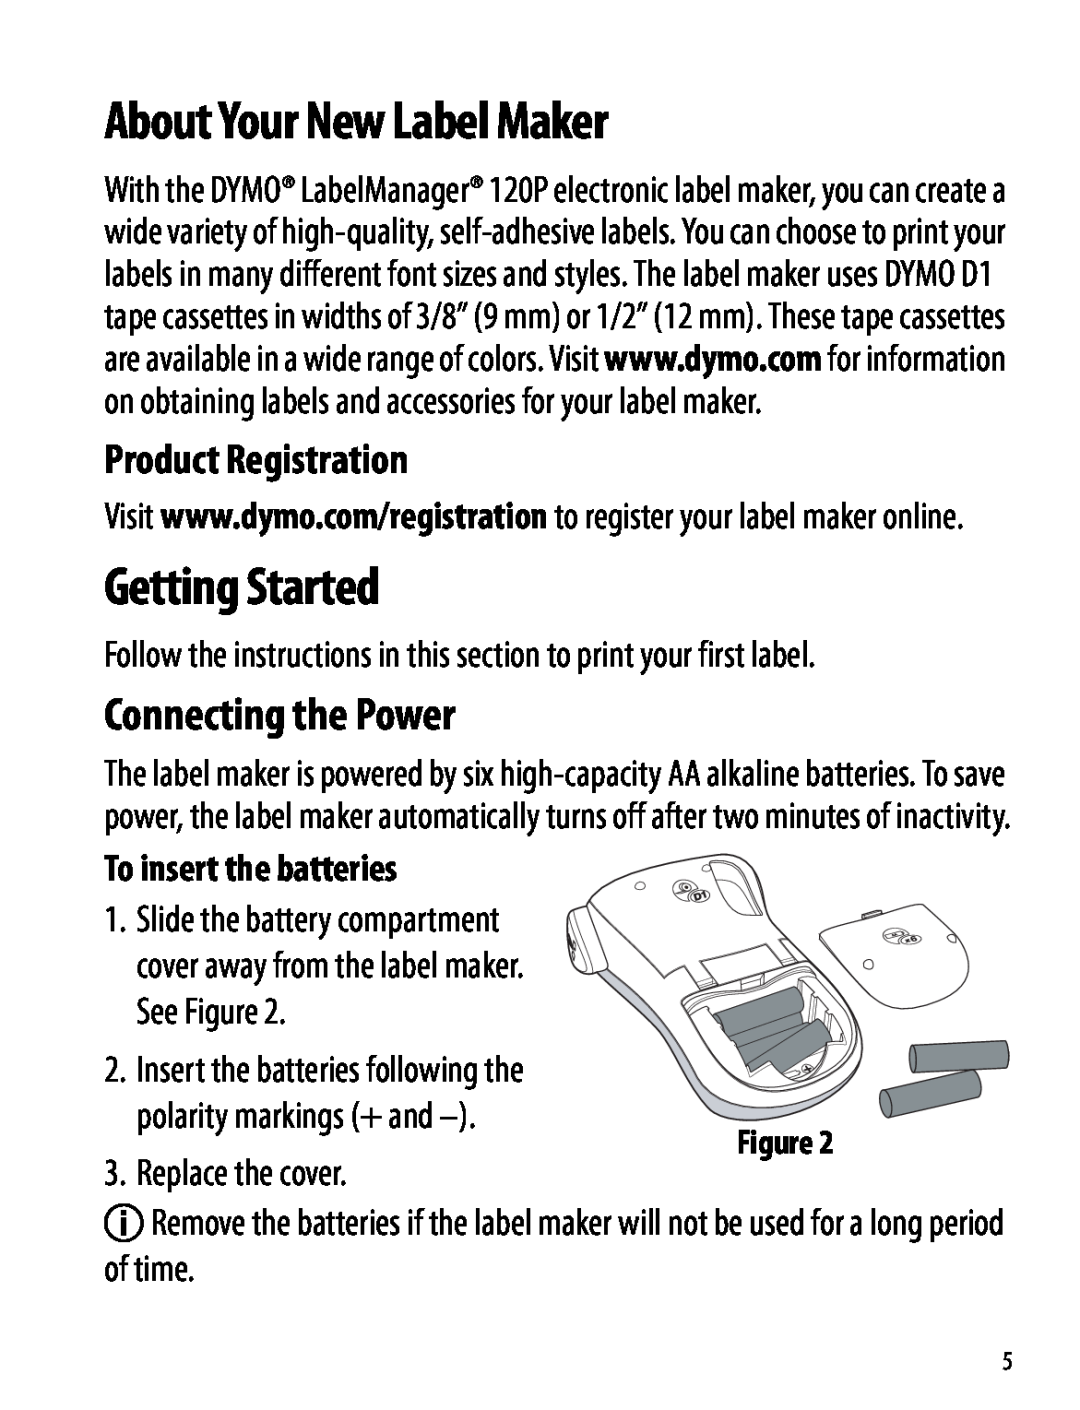 Dymo 120P About Your New Label Maker, Getting Started, Connecting the Power, To insert the batteries, Product Registration 